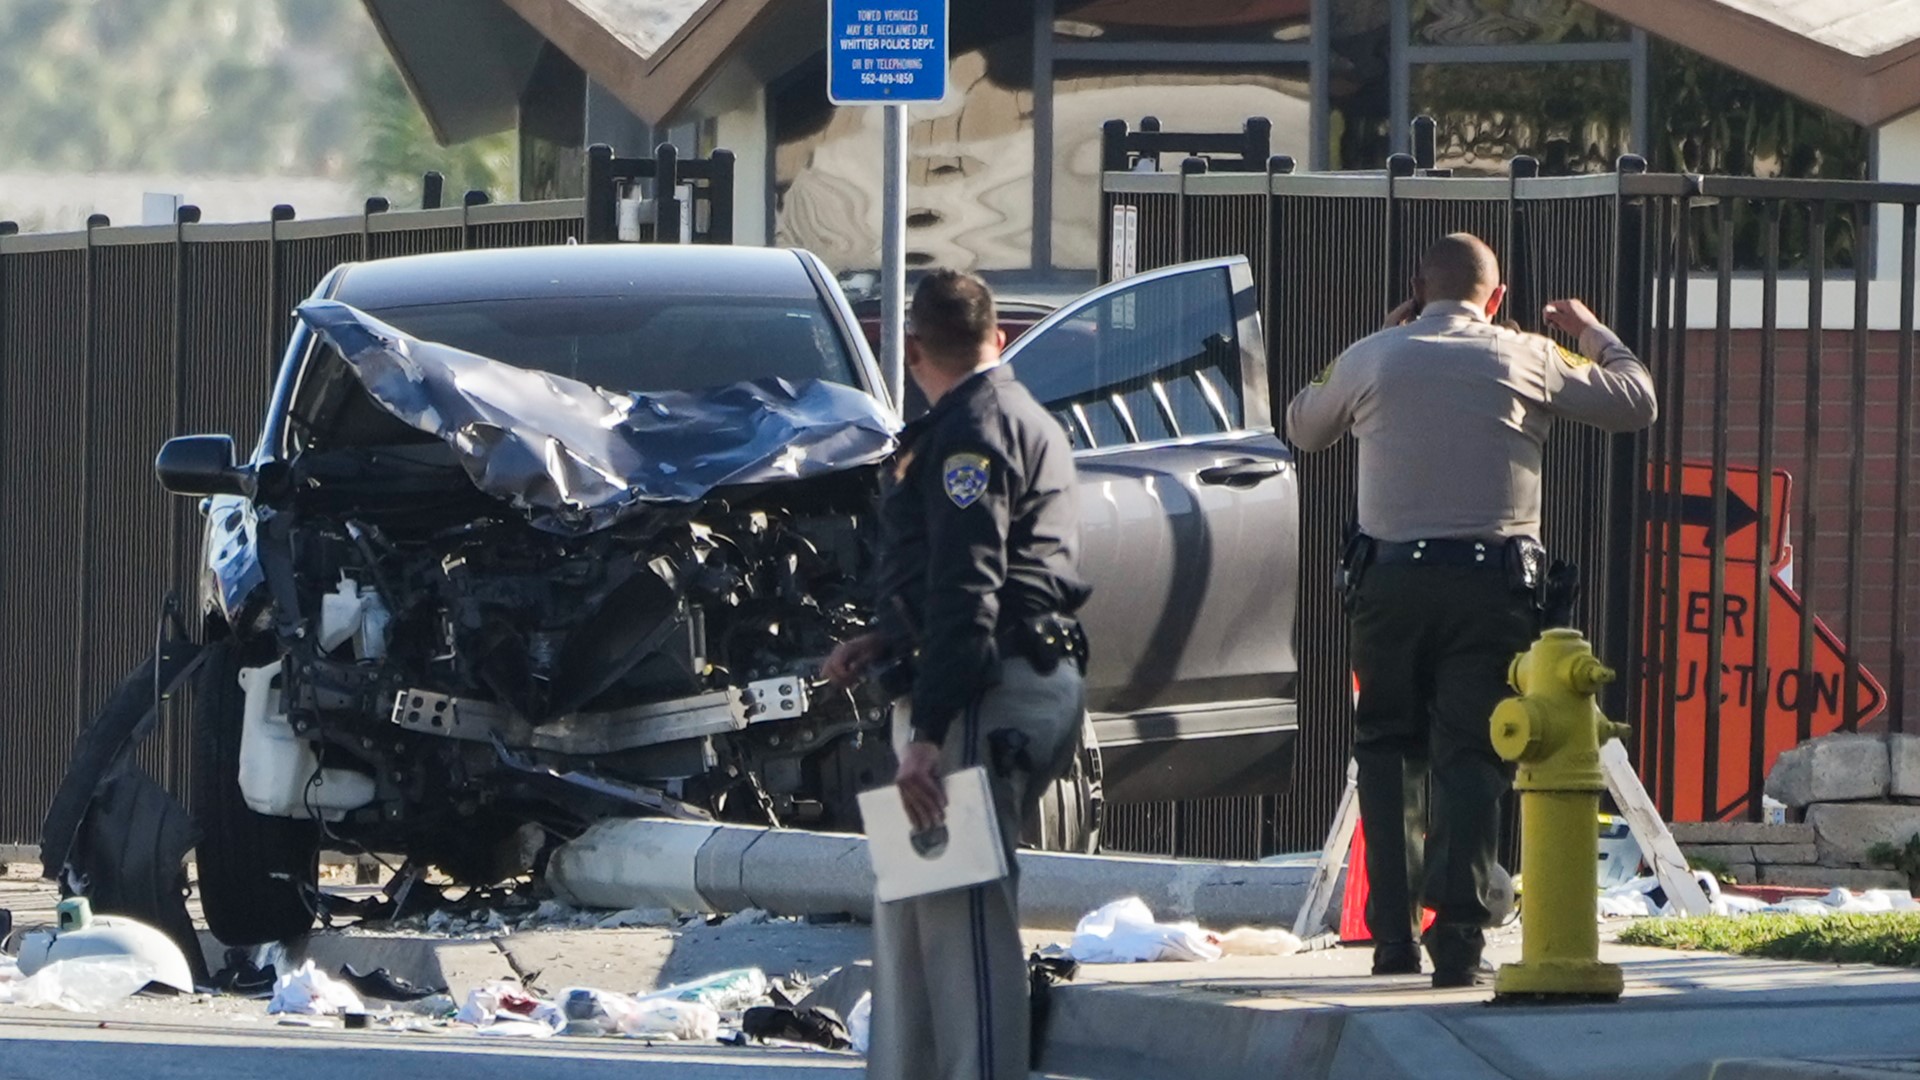 Nicholas Joseph Gutierrez was arrested Wednesday for investigation of attempted murder on a peace officer. Five recruits were critically injured in the crash.